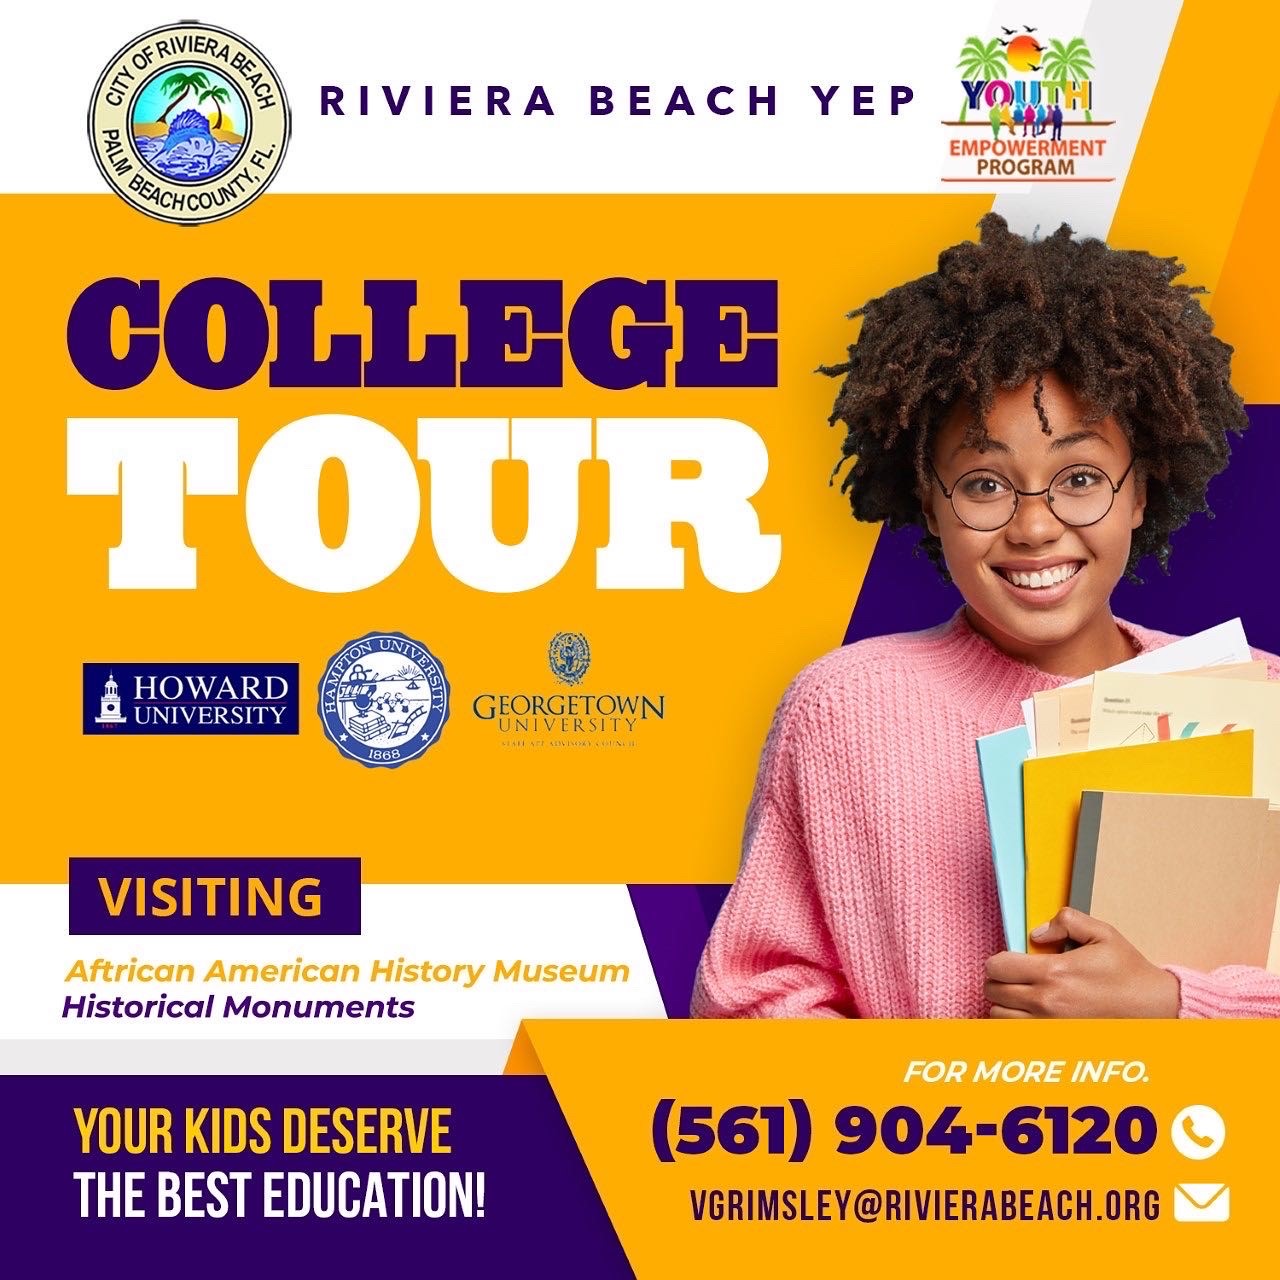 COLLEGE TOUR HOWARD A UNIVERSITY GEORGETOWN UNIVERSIT VISITING African American History Museum Historical Monuments YOUR KIDS DESERVE THE BEST EDUCATION! FOR MORE INFO. (561) 904-6120 C VGRIMSLEY@RIVIERABEACH.ORG